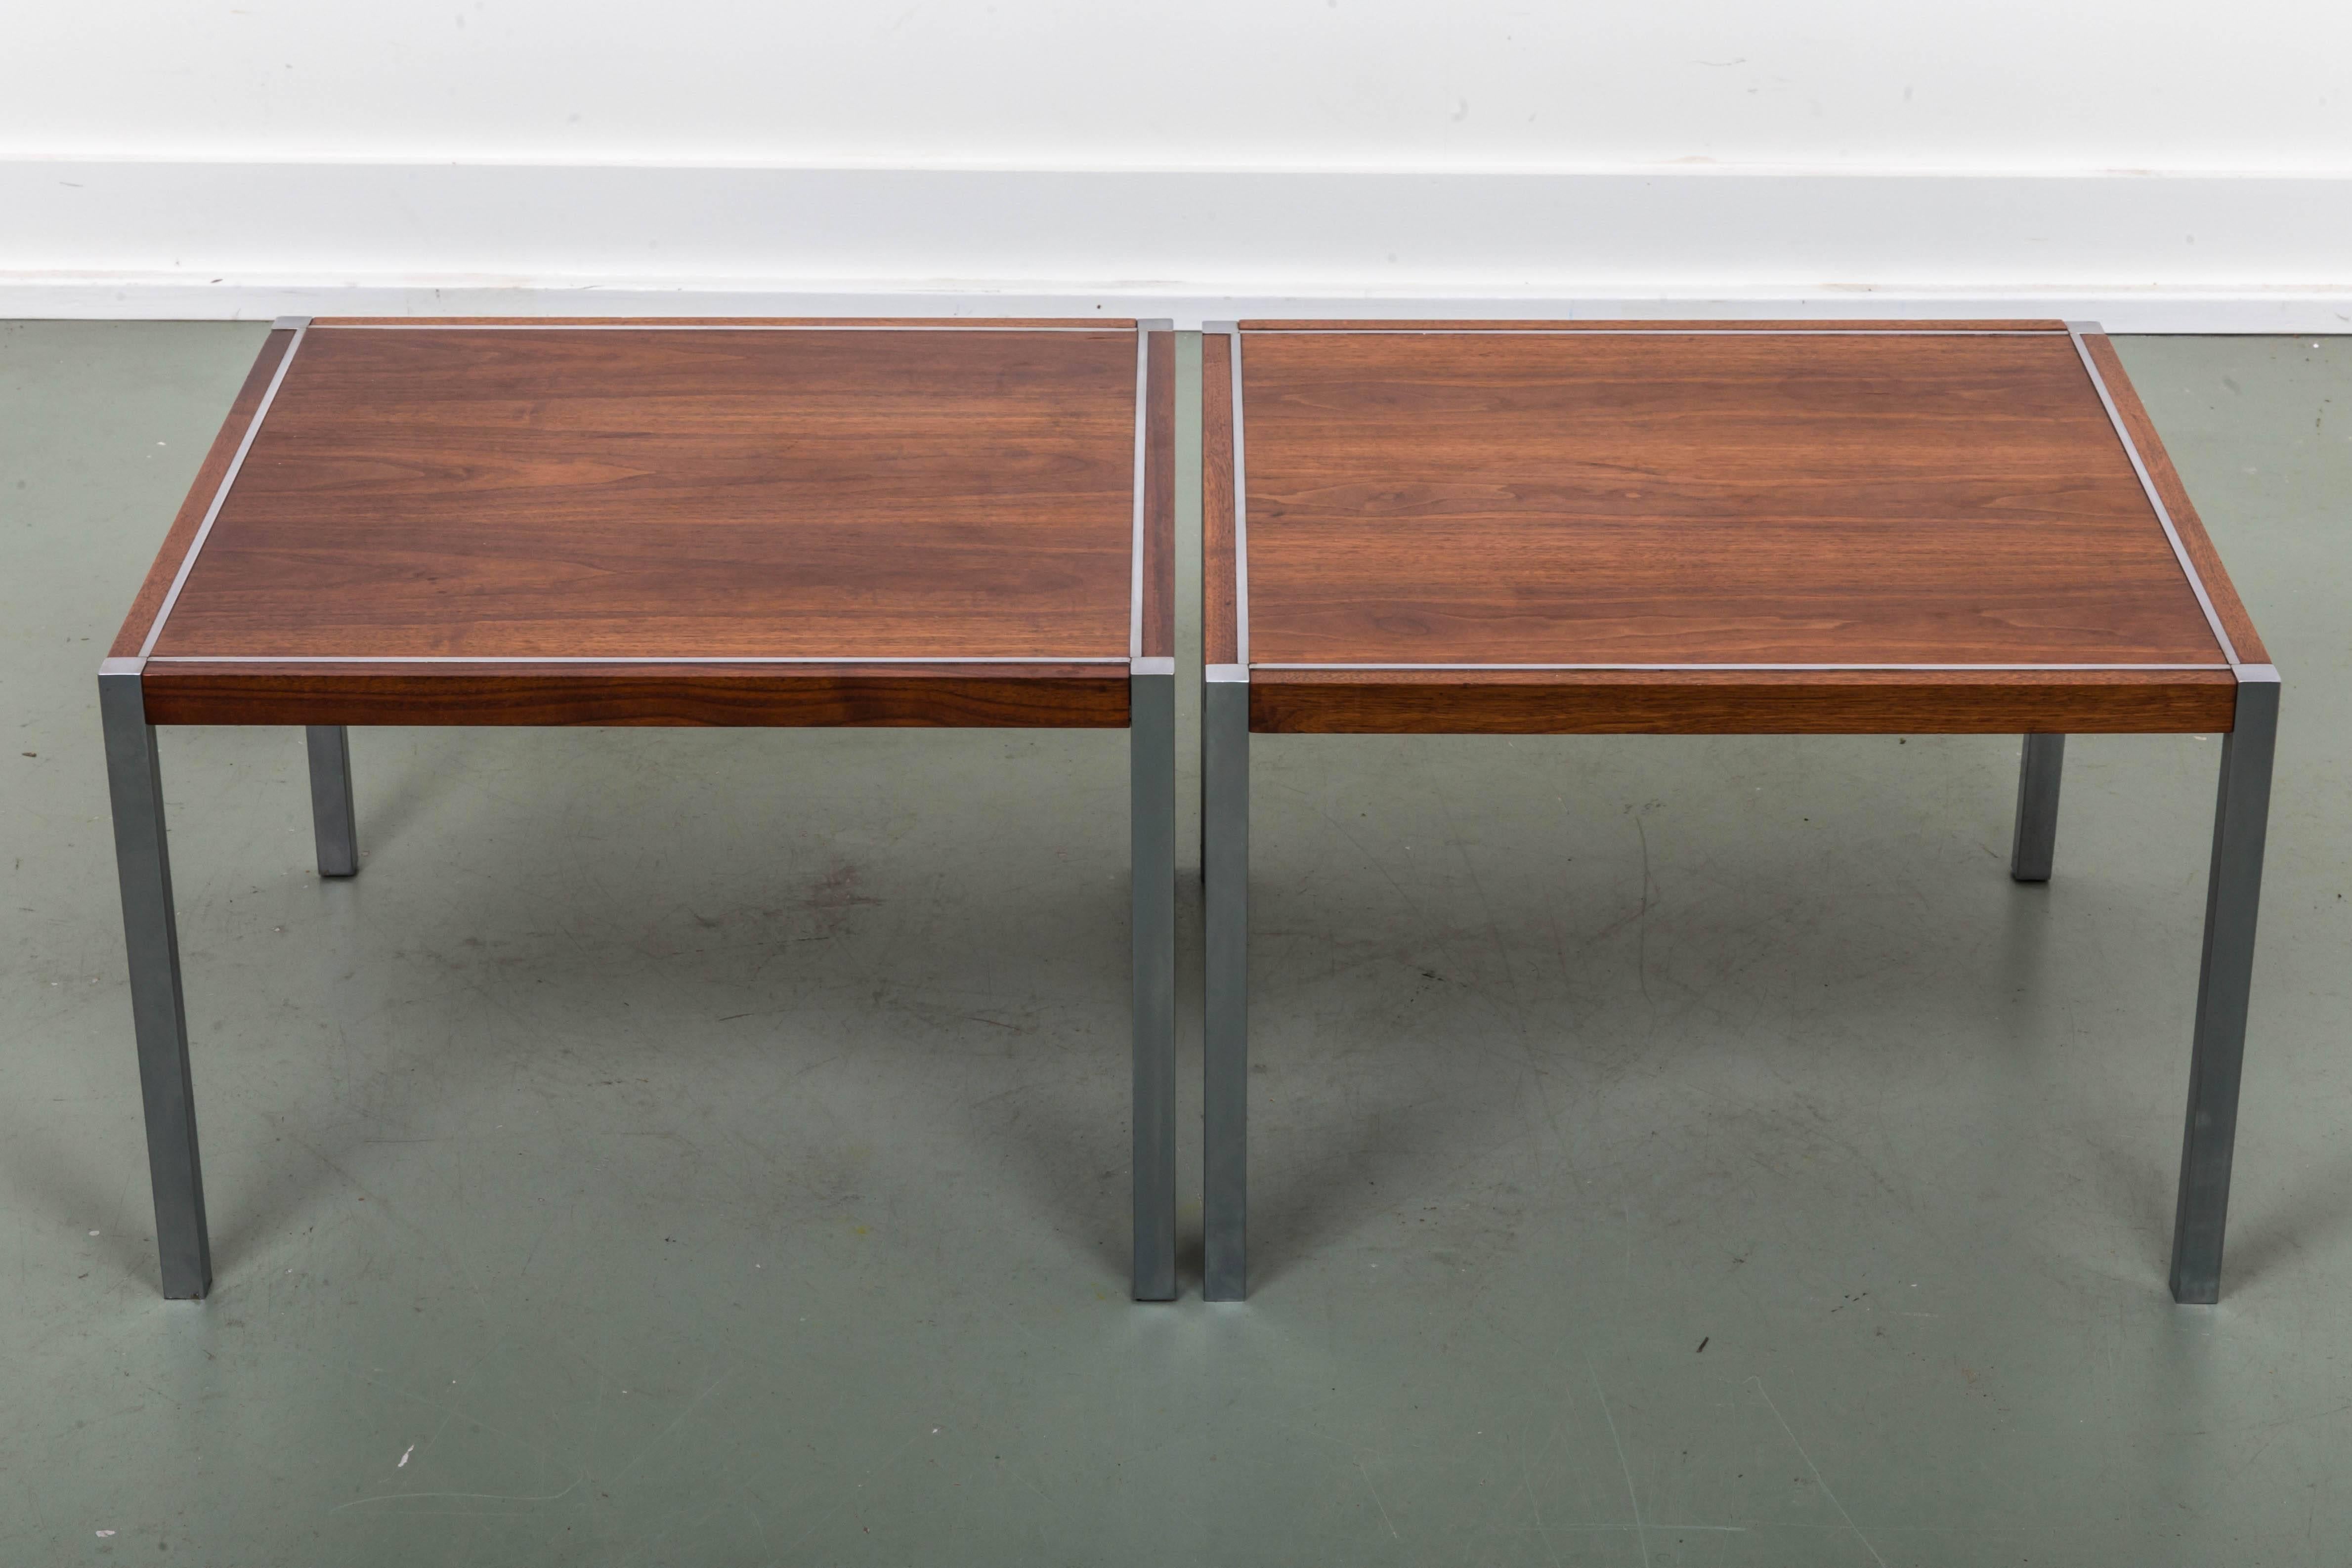 Pair of walnut and chromed steel legs and inset detailed side tables.